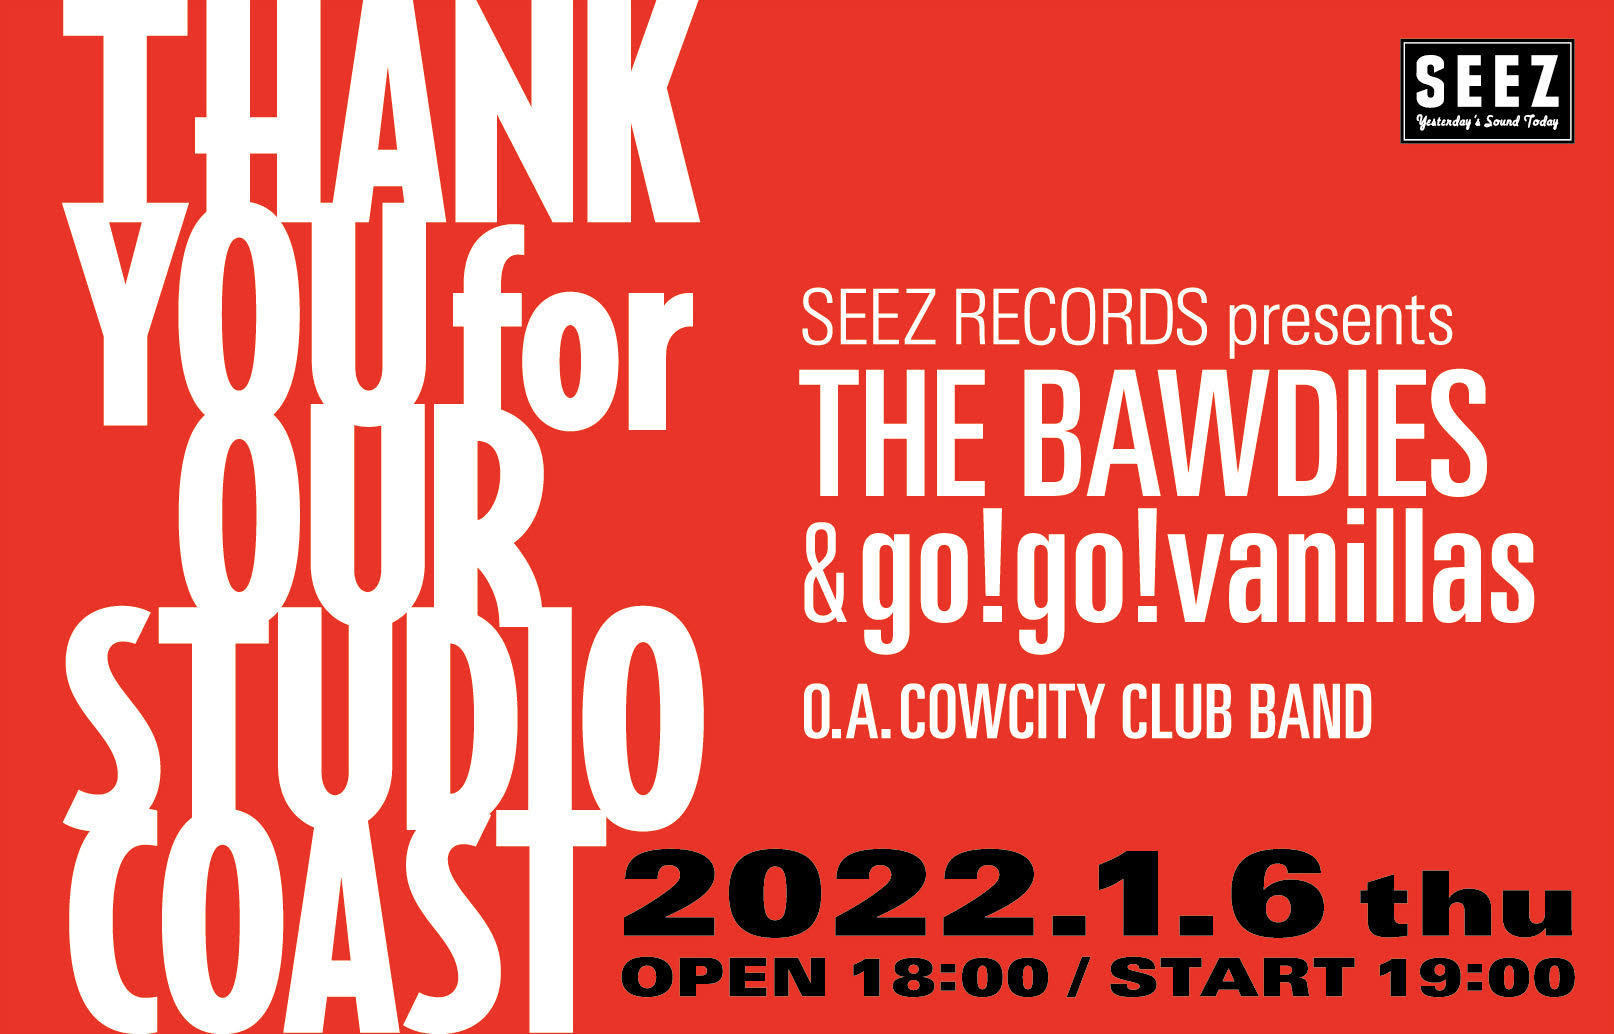 SEEZ RECORDS presents「THANK YOU FOR OUR STUDIO COAST」オフィシャル先行受付スタート！